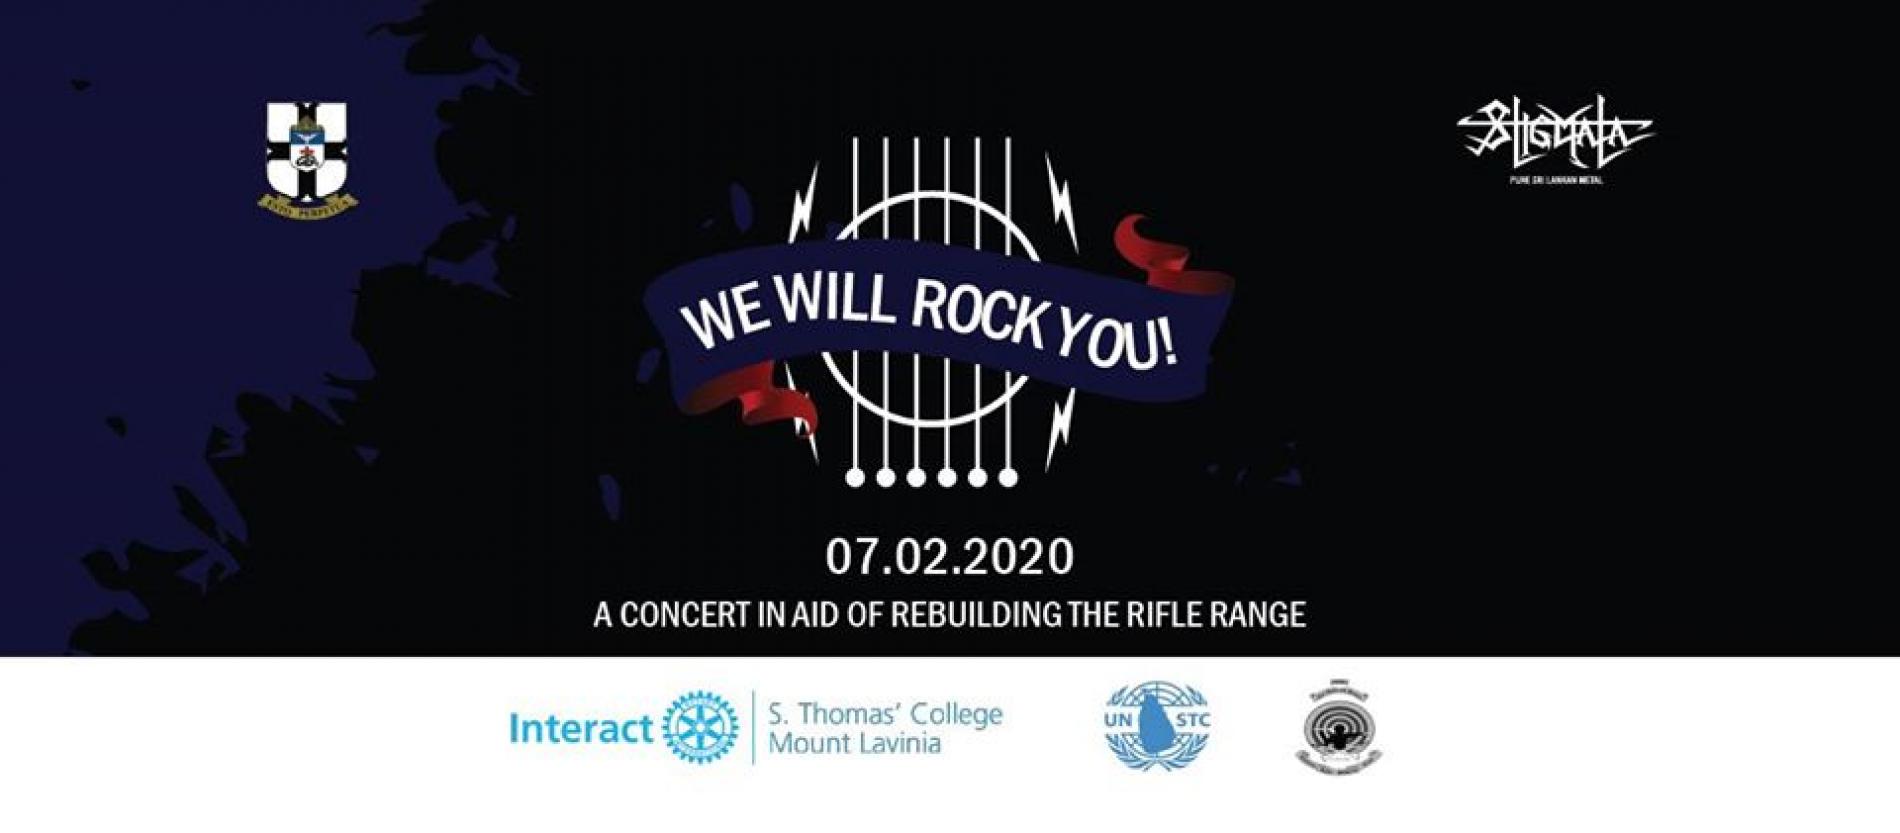 We Will Rock You!